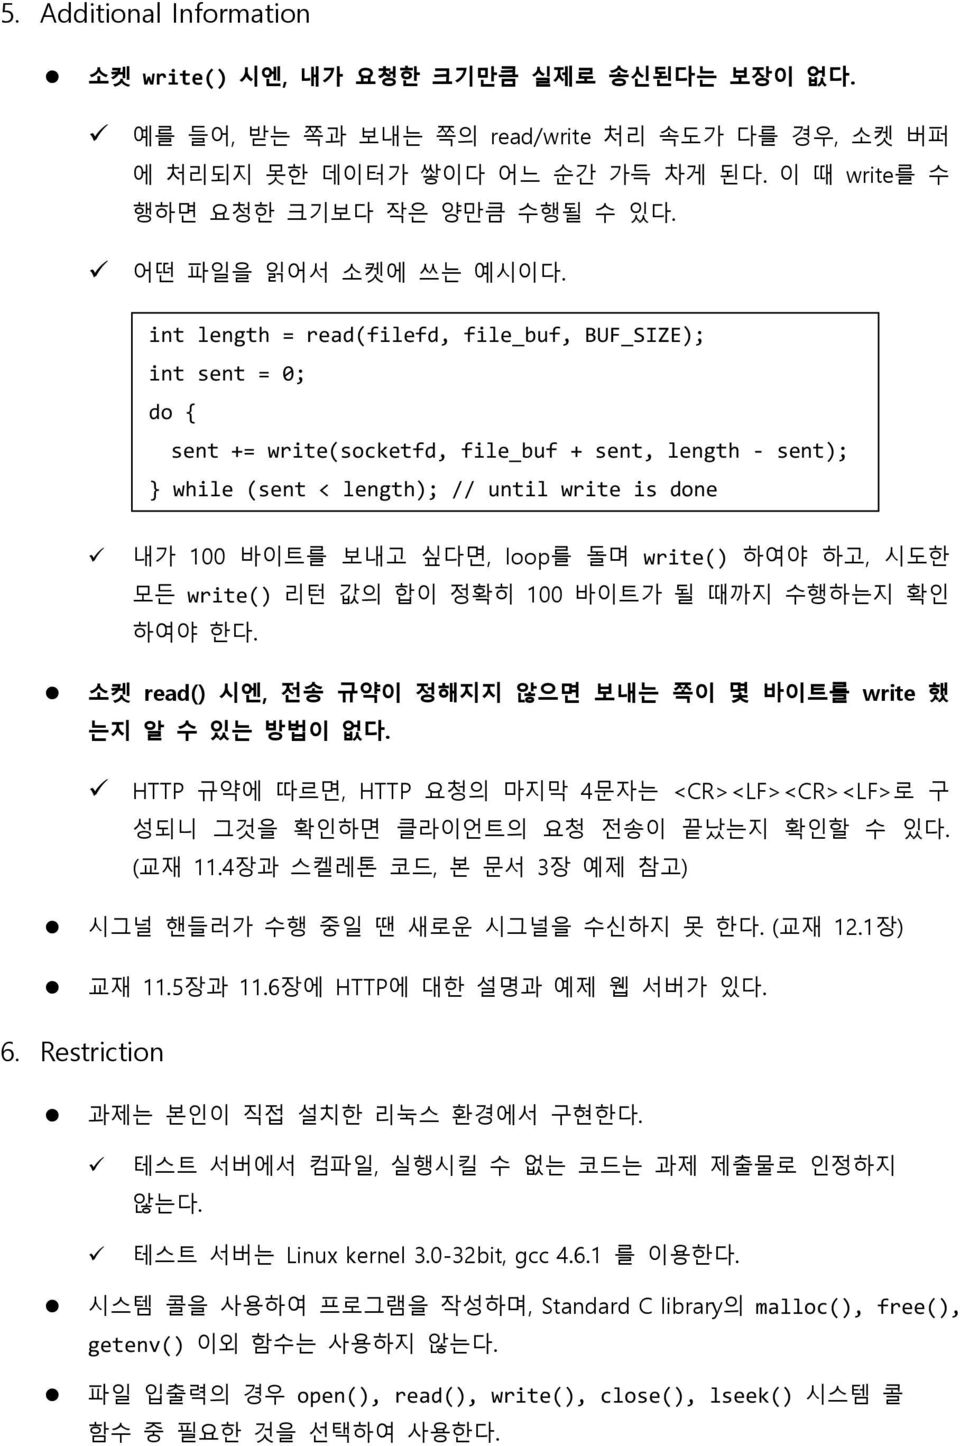 int length = read(filefd, file_buf, BUF_SIZE); int sent = 0; do { sent += write(socketfd, file_buf + sent, length - sent); } while (sent < length); // until write is done 내가 100 바이트를 보내고 싶다면, loop를